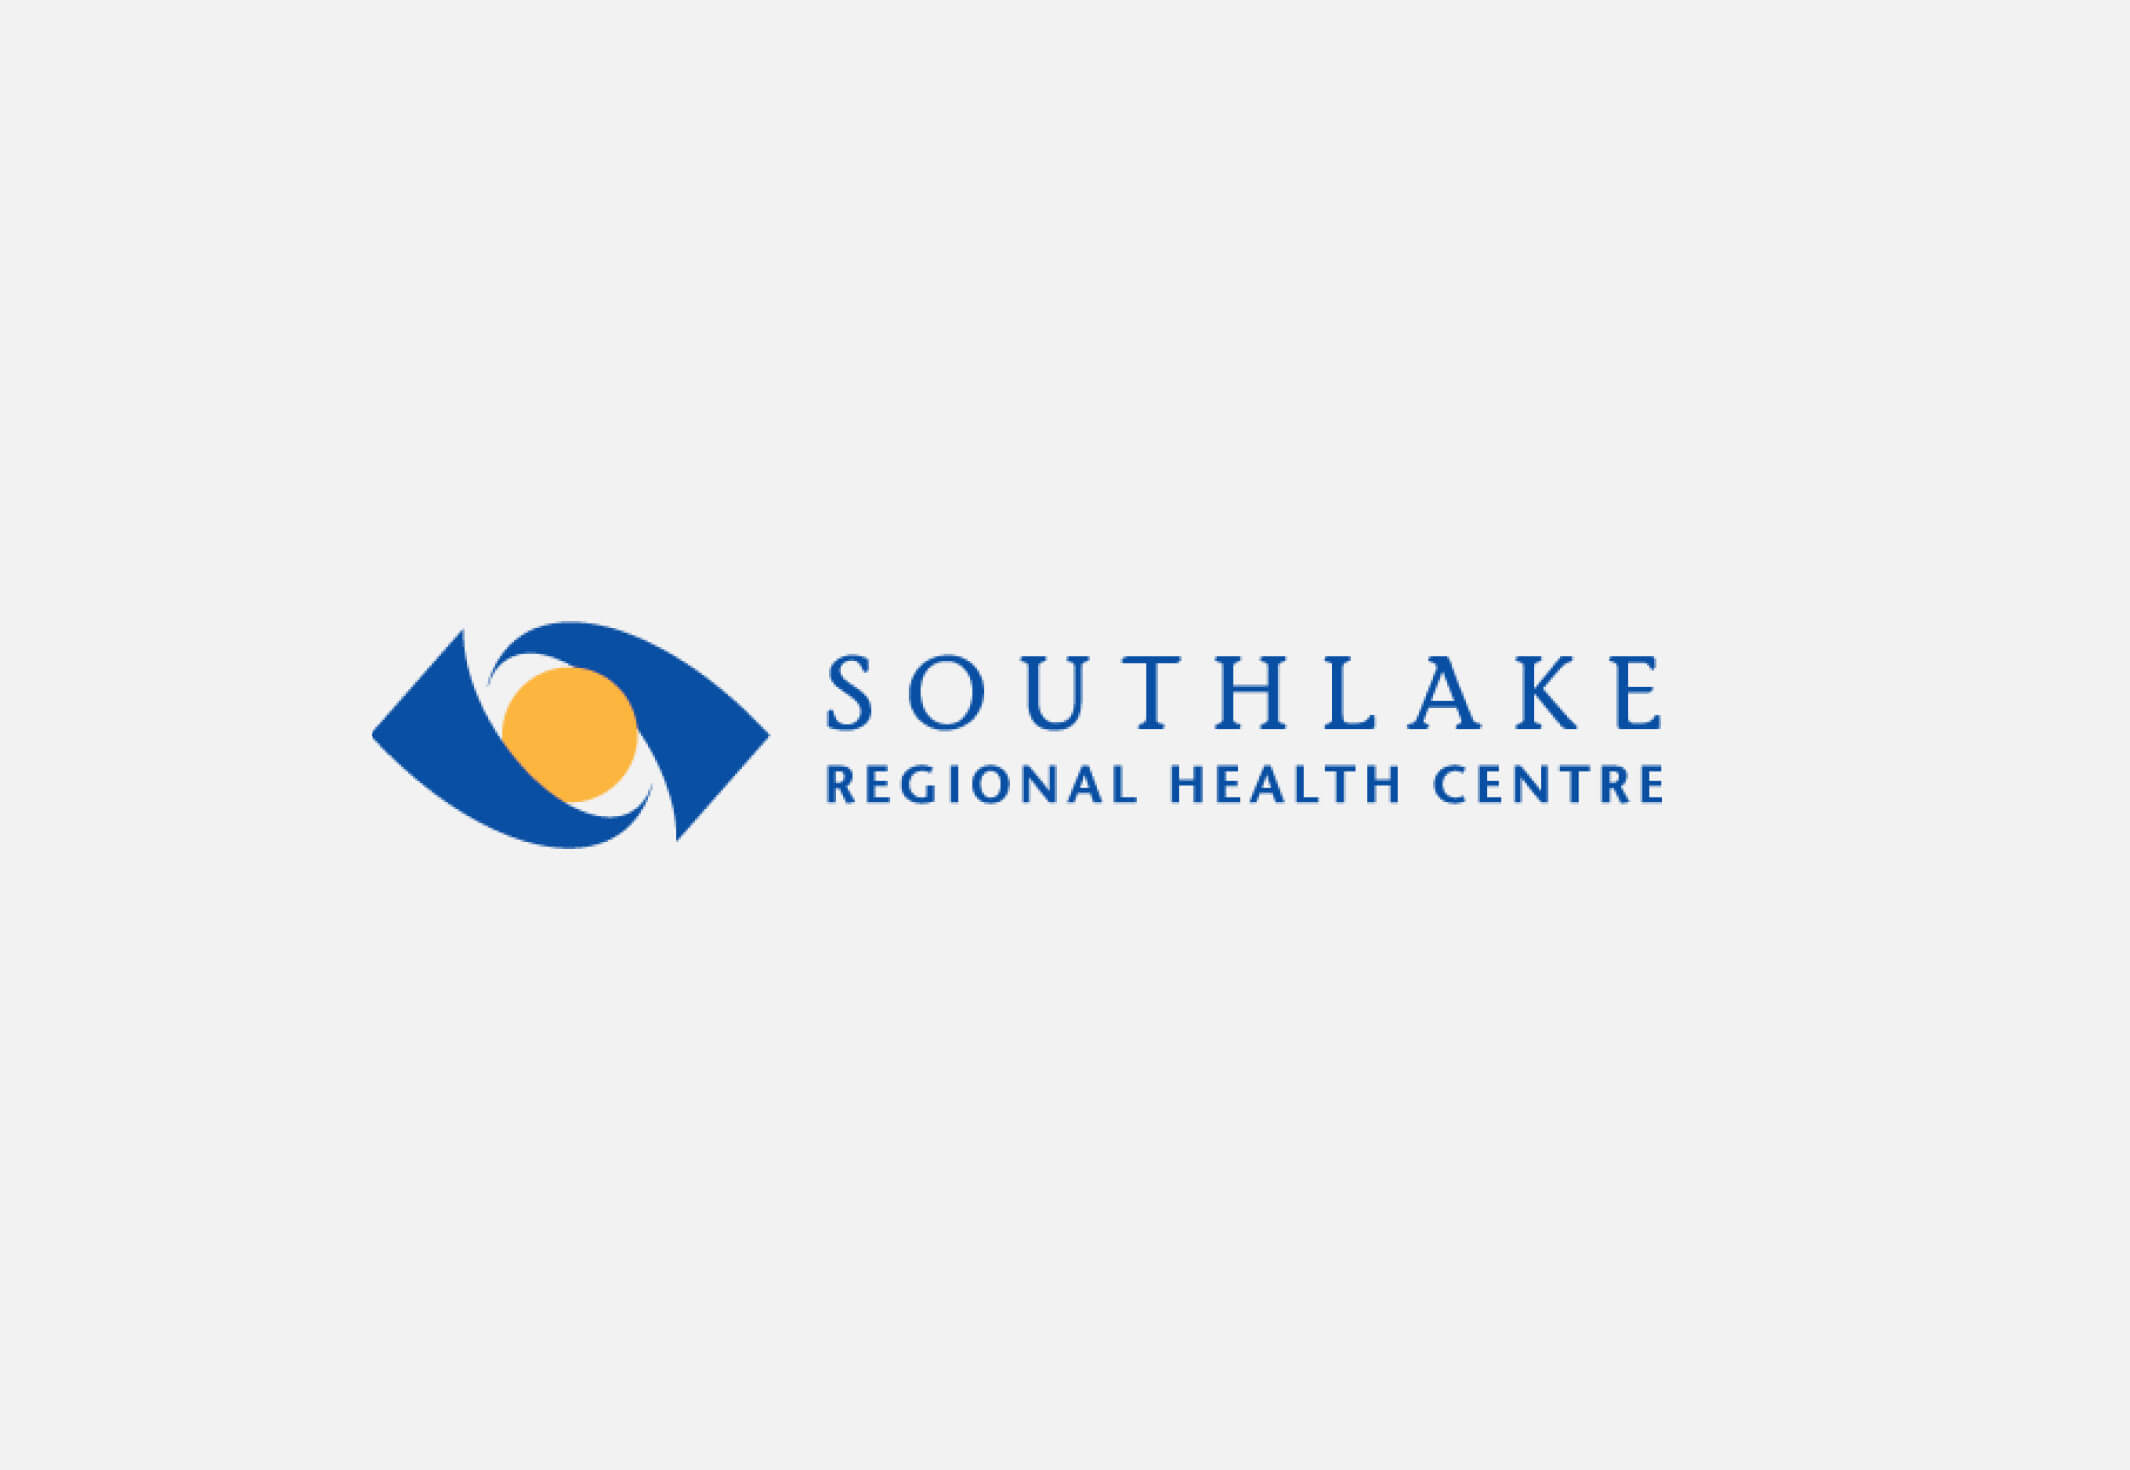 The old Southlake Regional Health Centre logo